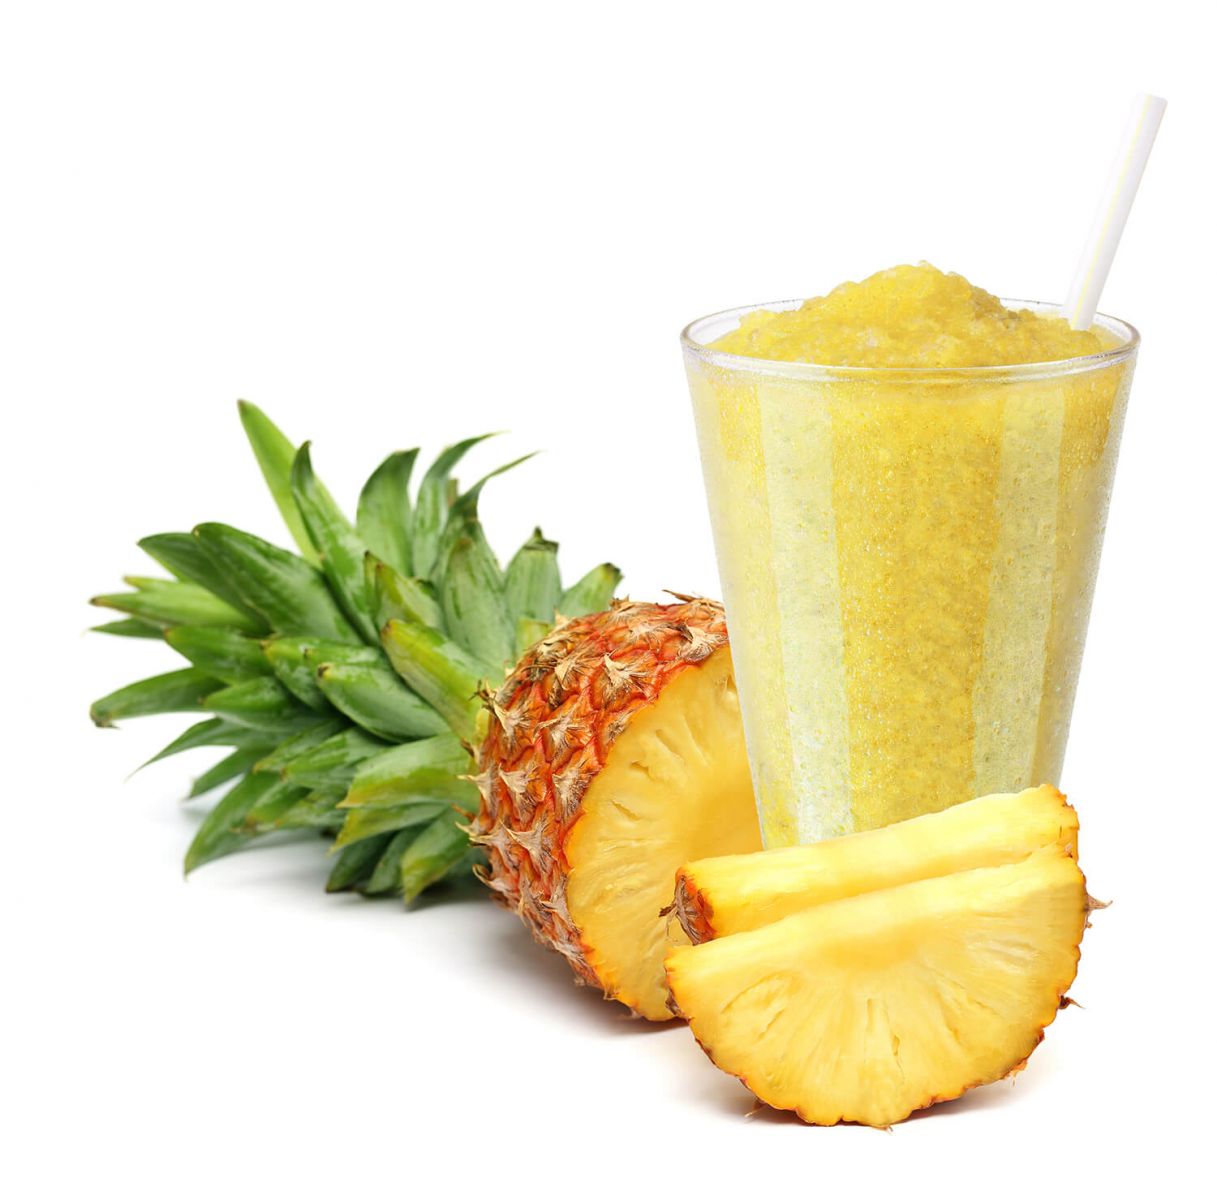 http://lavifood.com/en/products/puree/pineapple